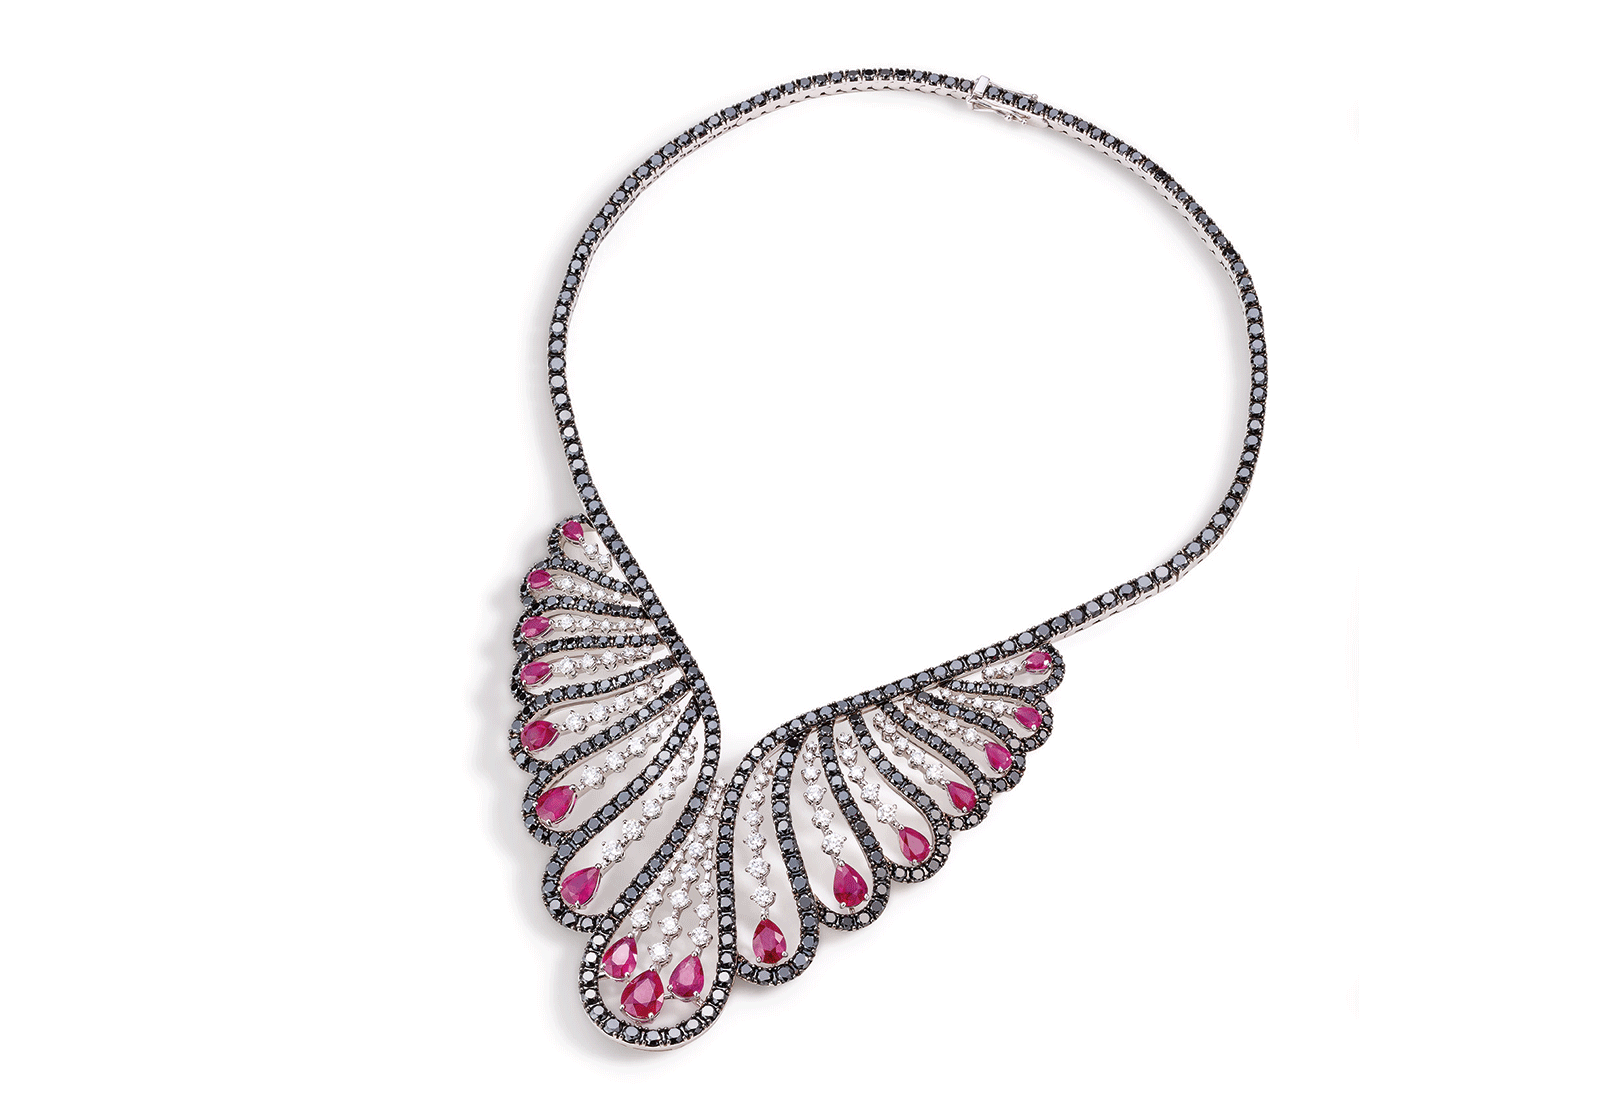 The Vanita necklace by Damiani